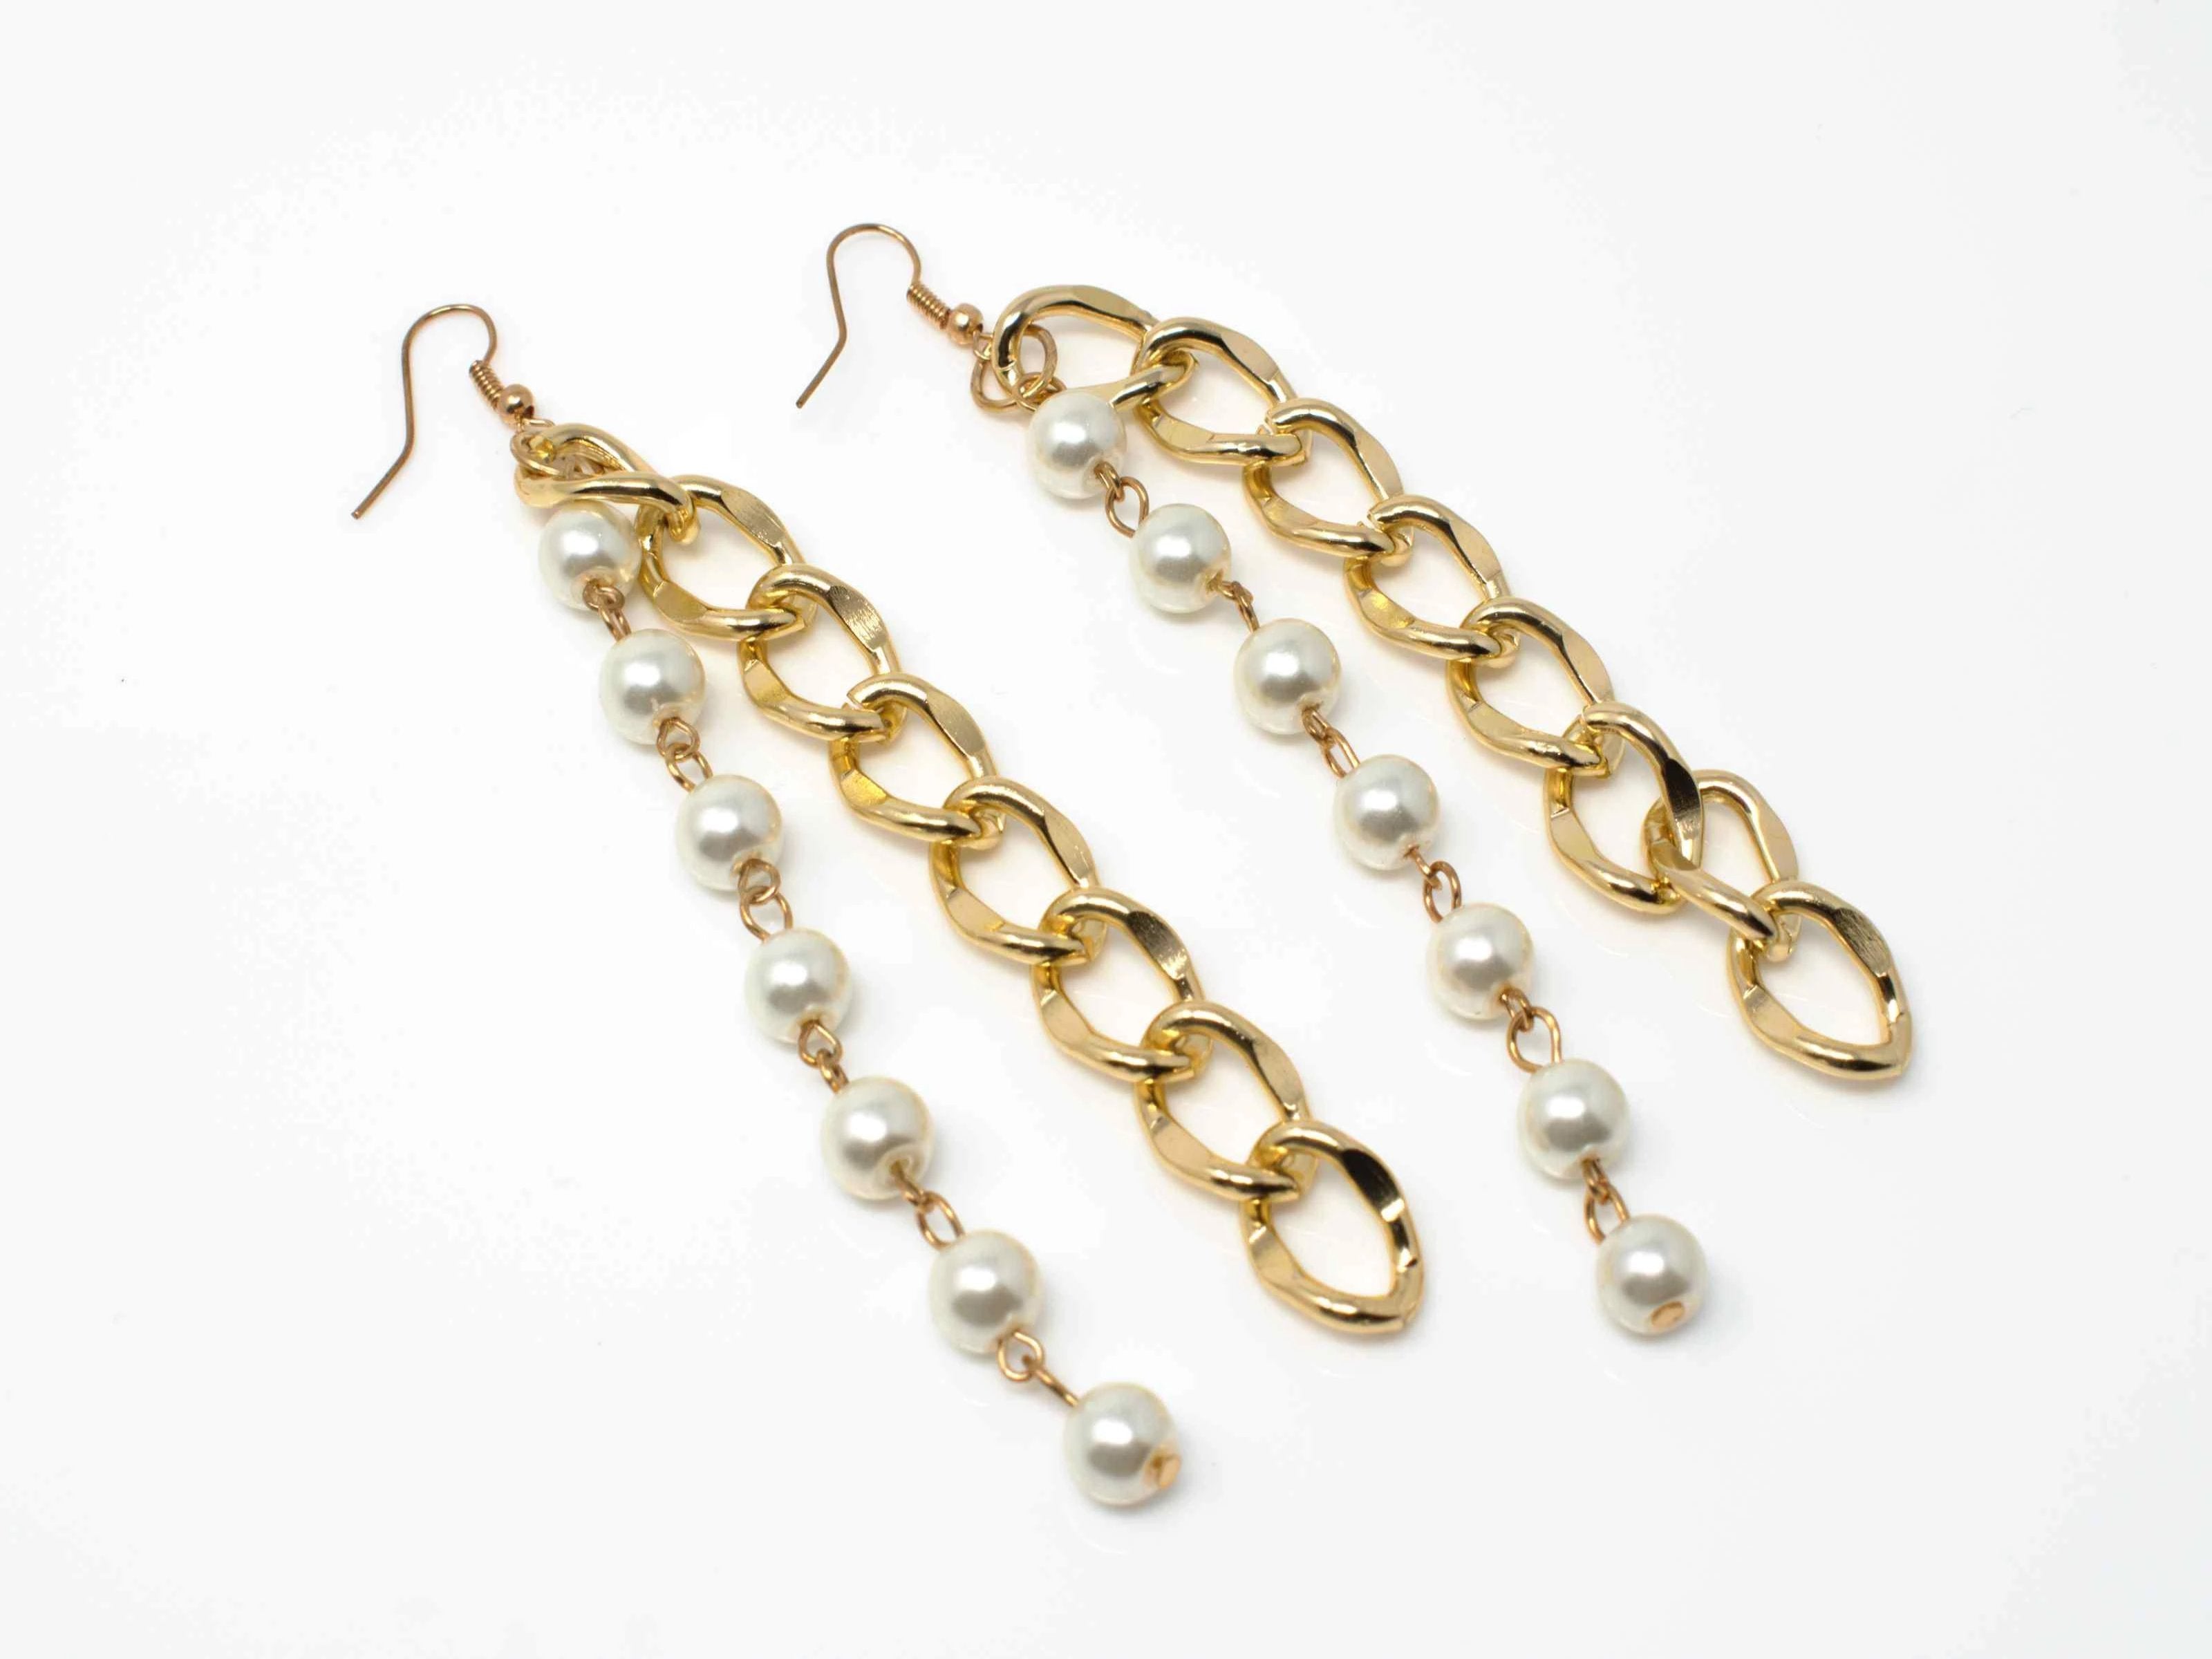 An elegant gold drop dangle earring with pearl accents and a fish hook clasp.